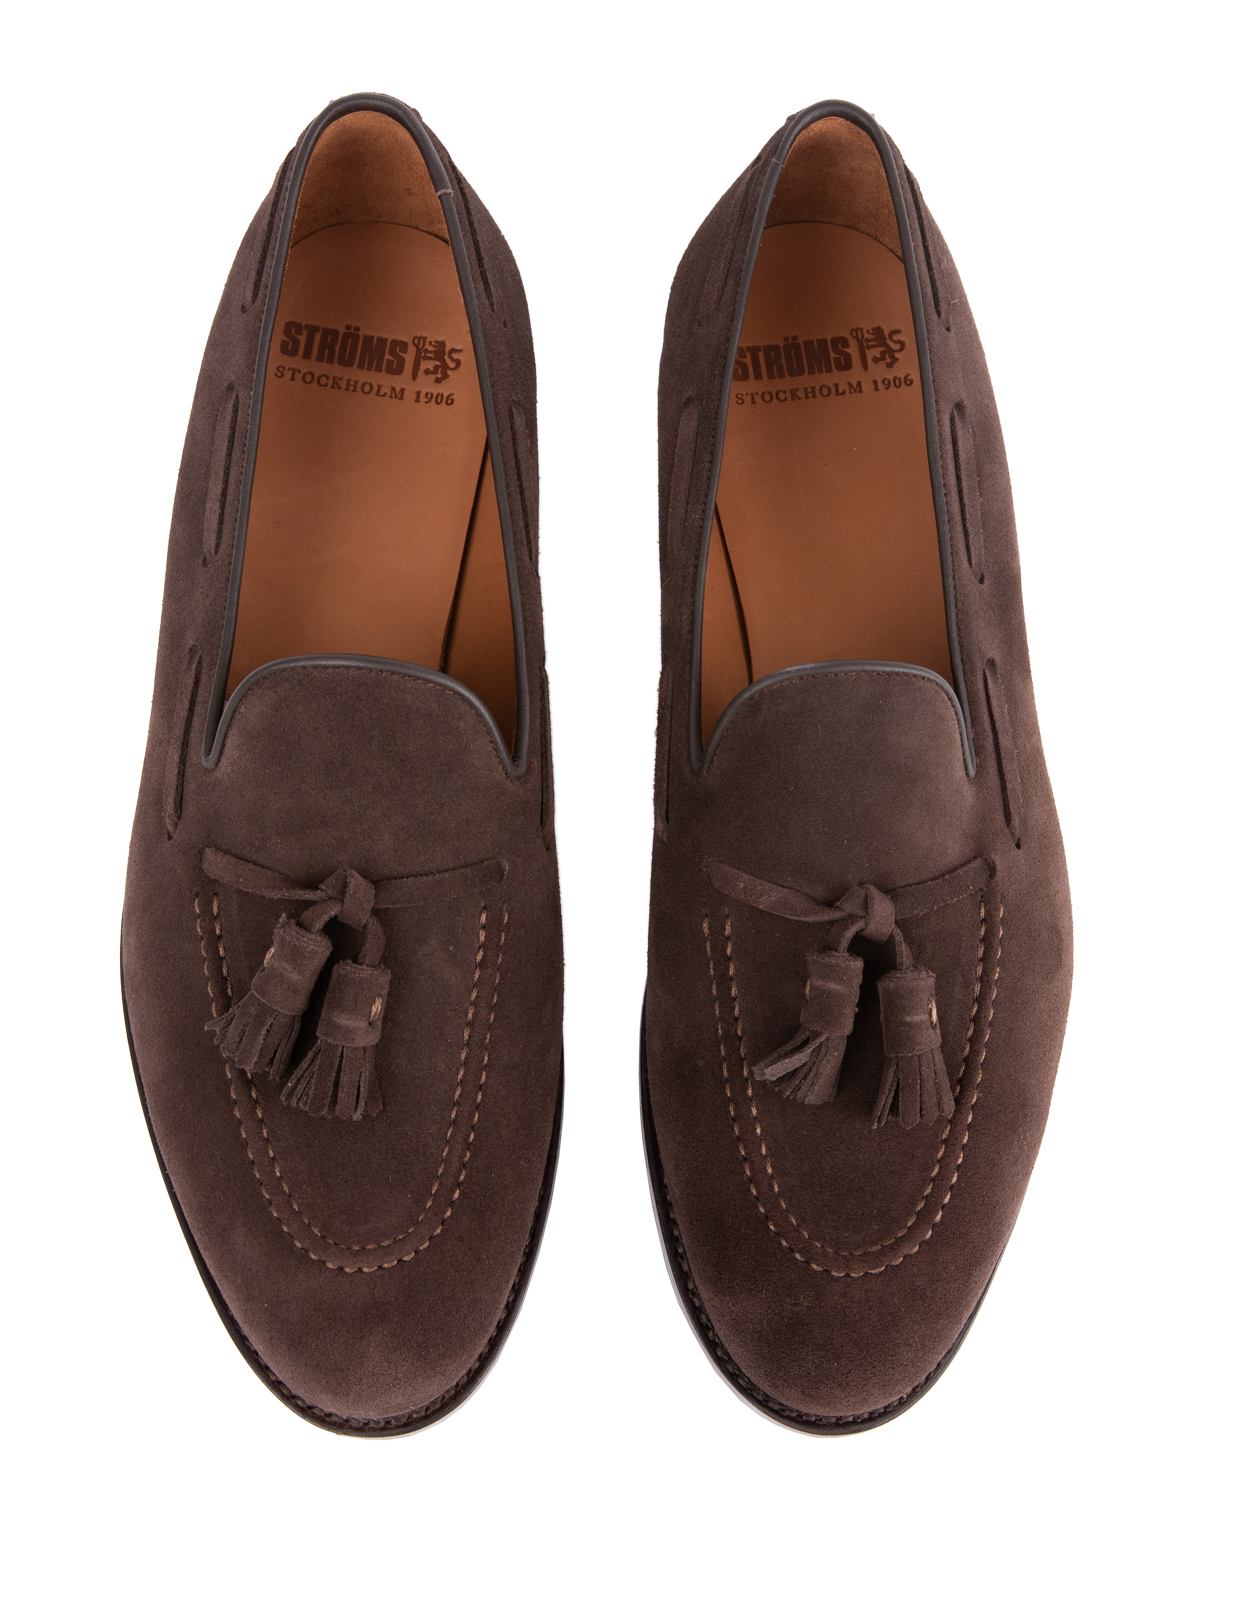 Tassel Loafers Suede Bitter Chocolate Stl 6